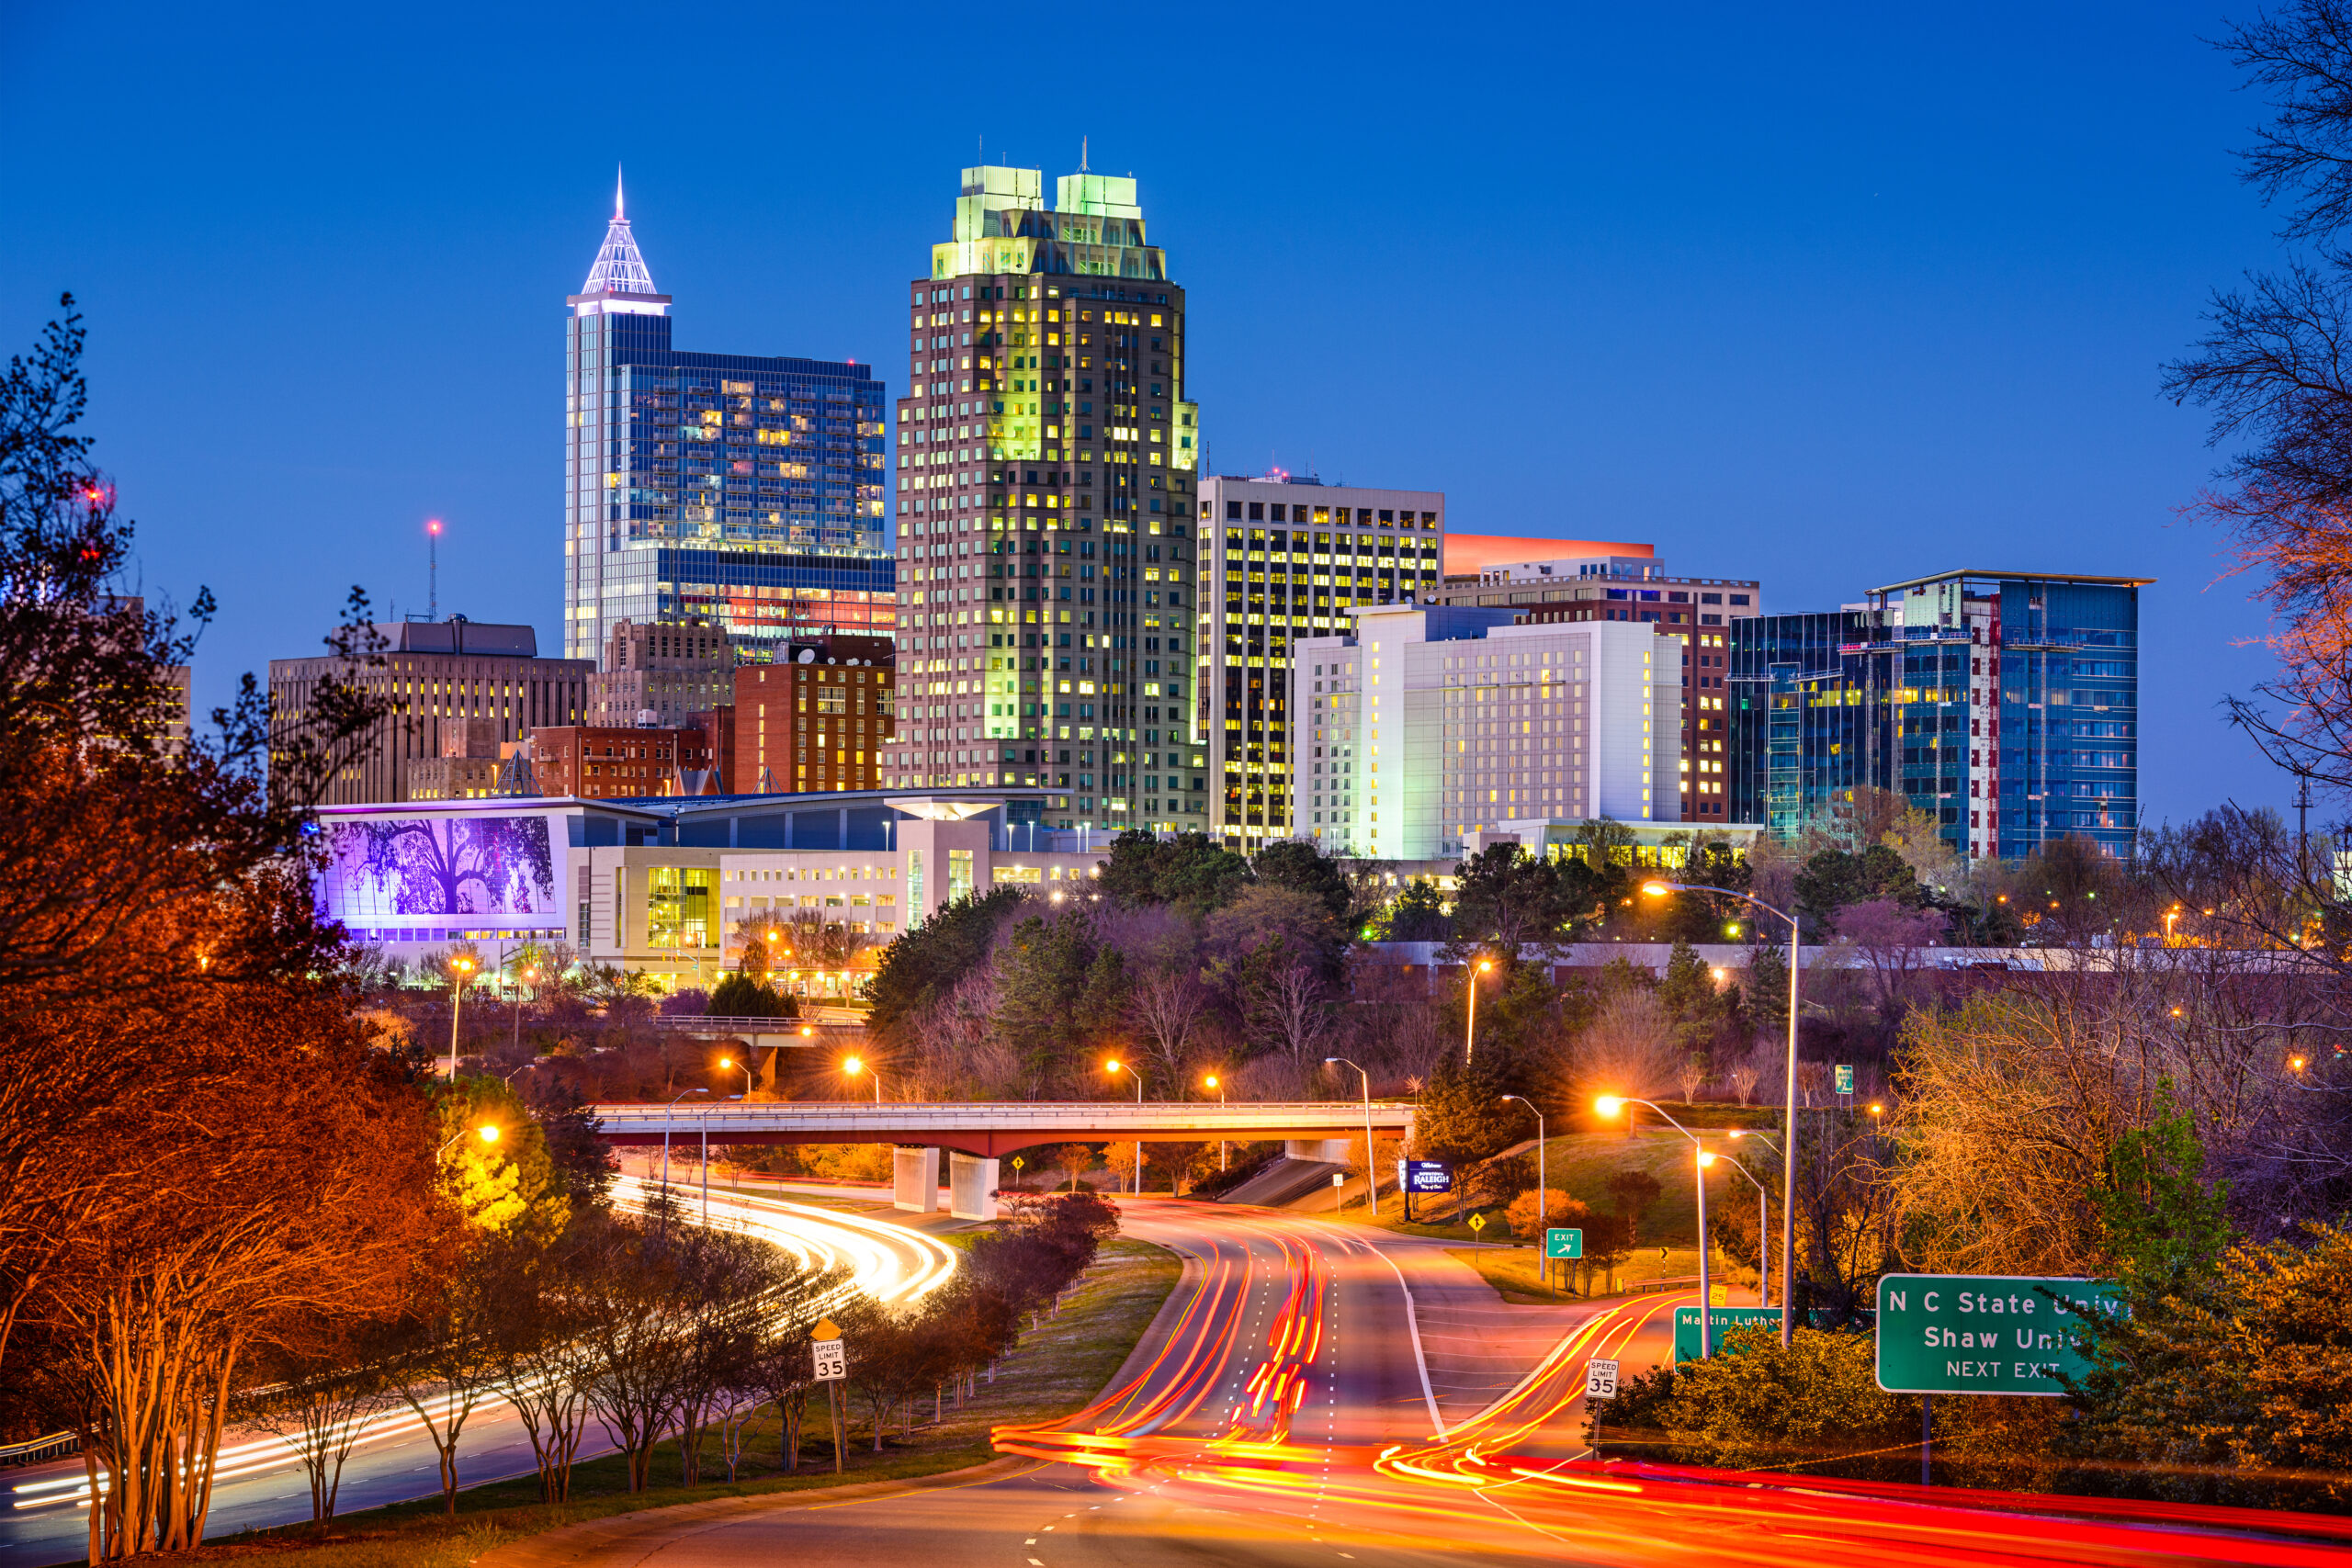 North Carolina Reigns as “America’s Top State For Business”